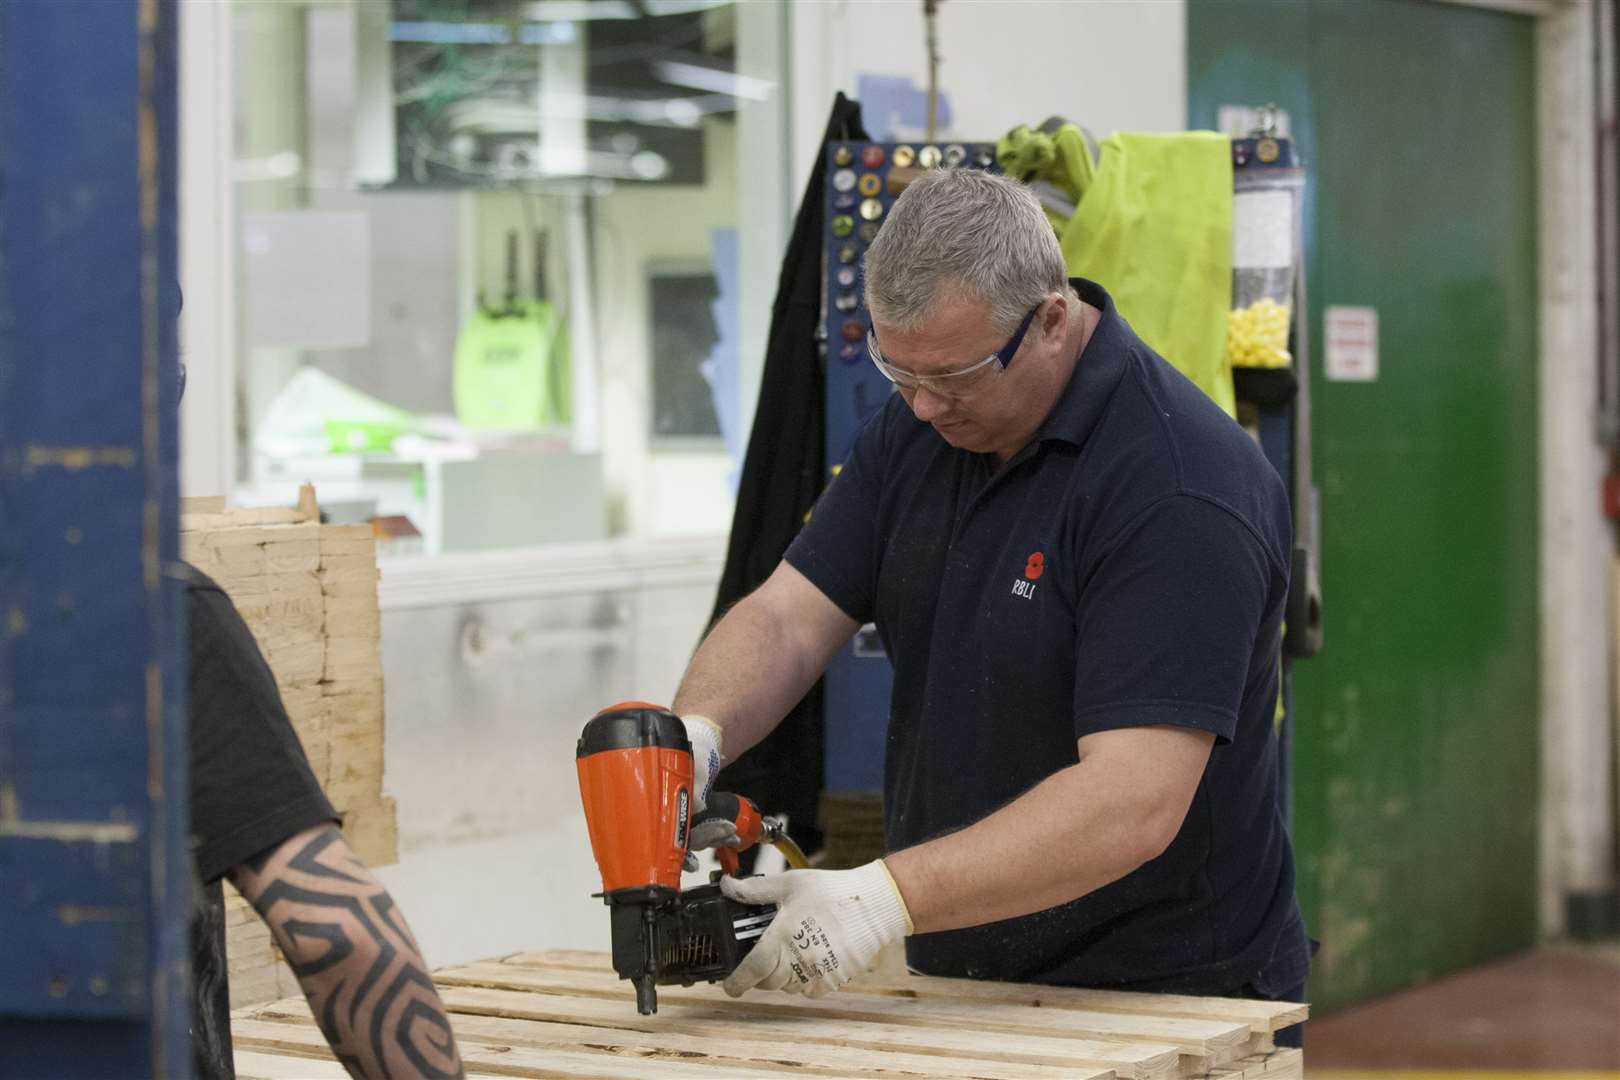 Pallet company Pooling Partners has helped create nine new jobs for ex-service men and women working at Britain's Bravest Manufacturing Company